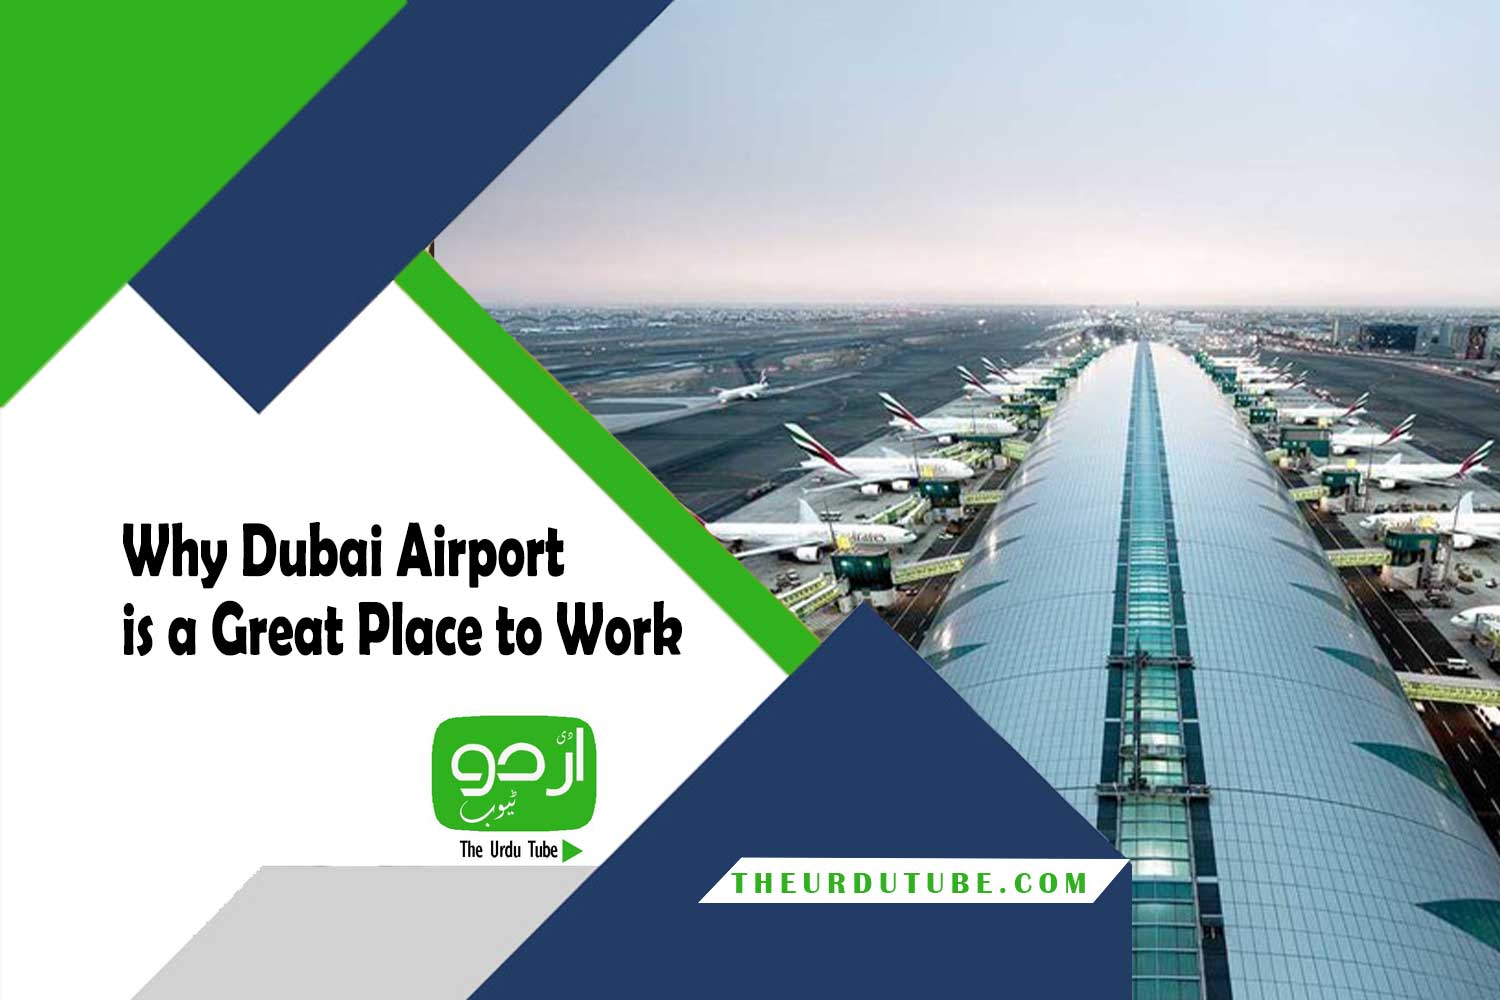 Why Dubai Airport is a Great Place to Work